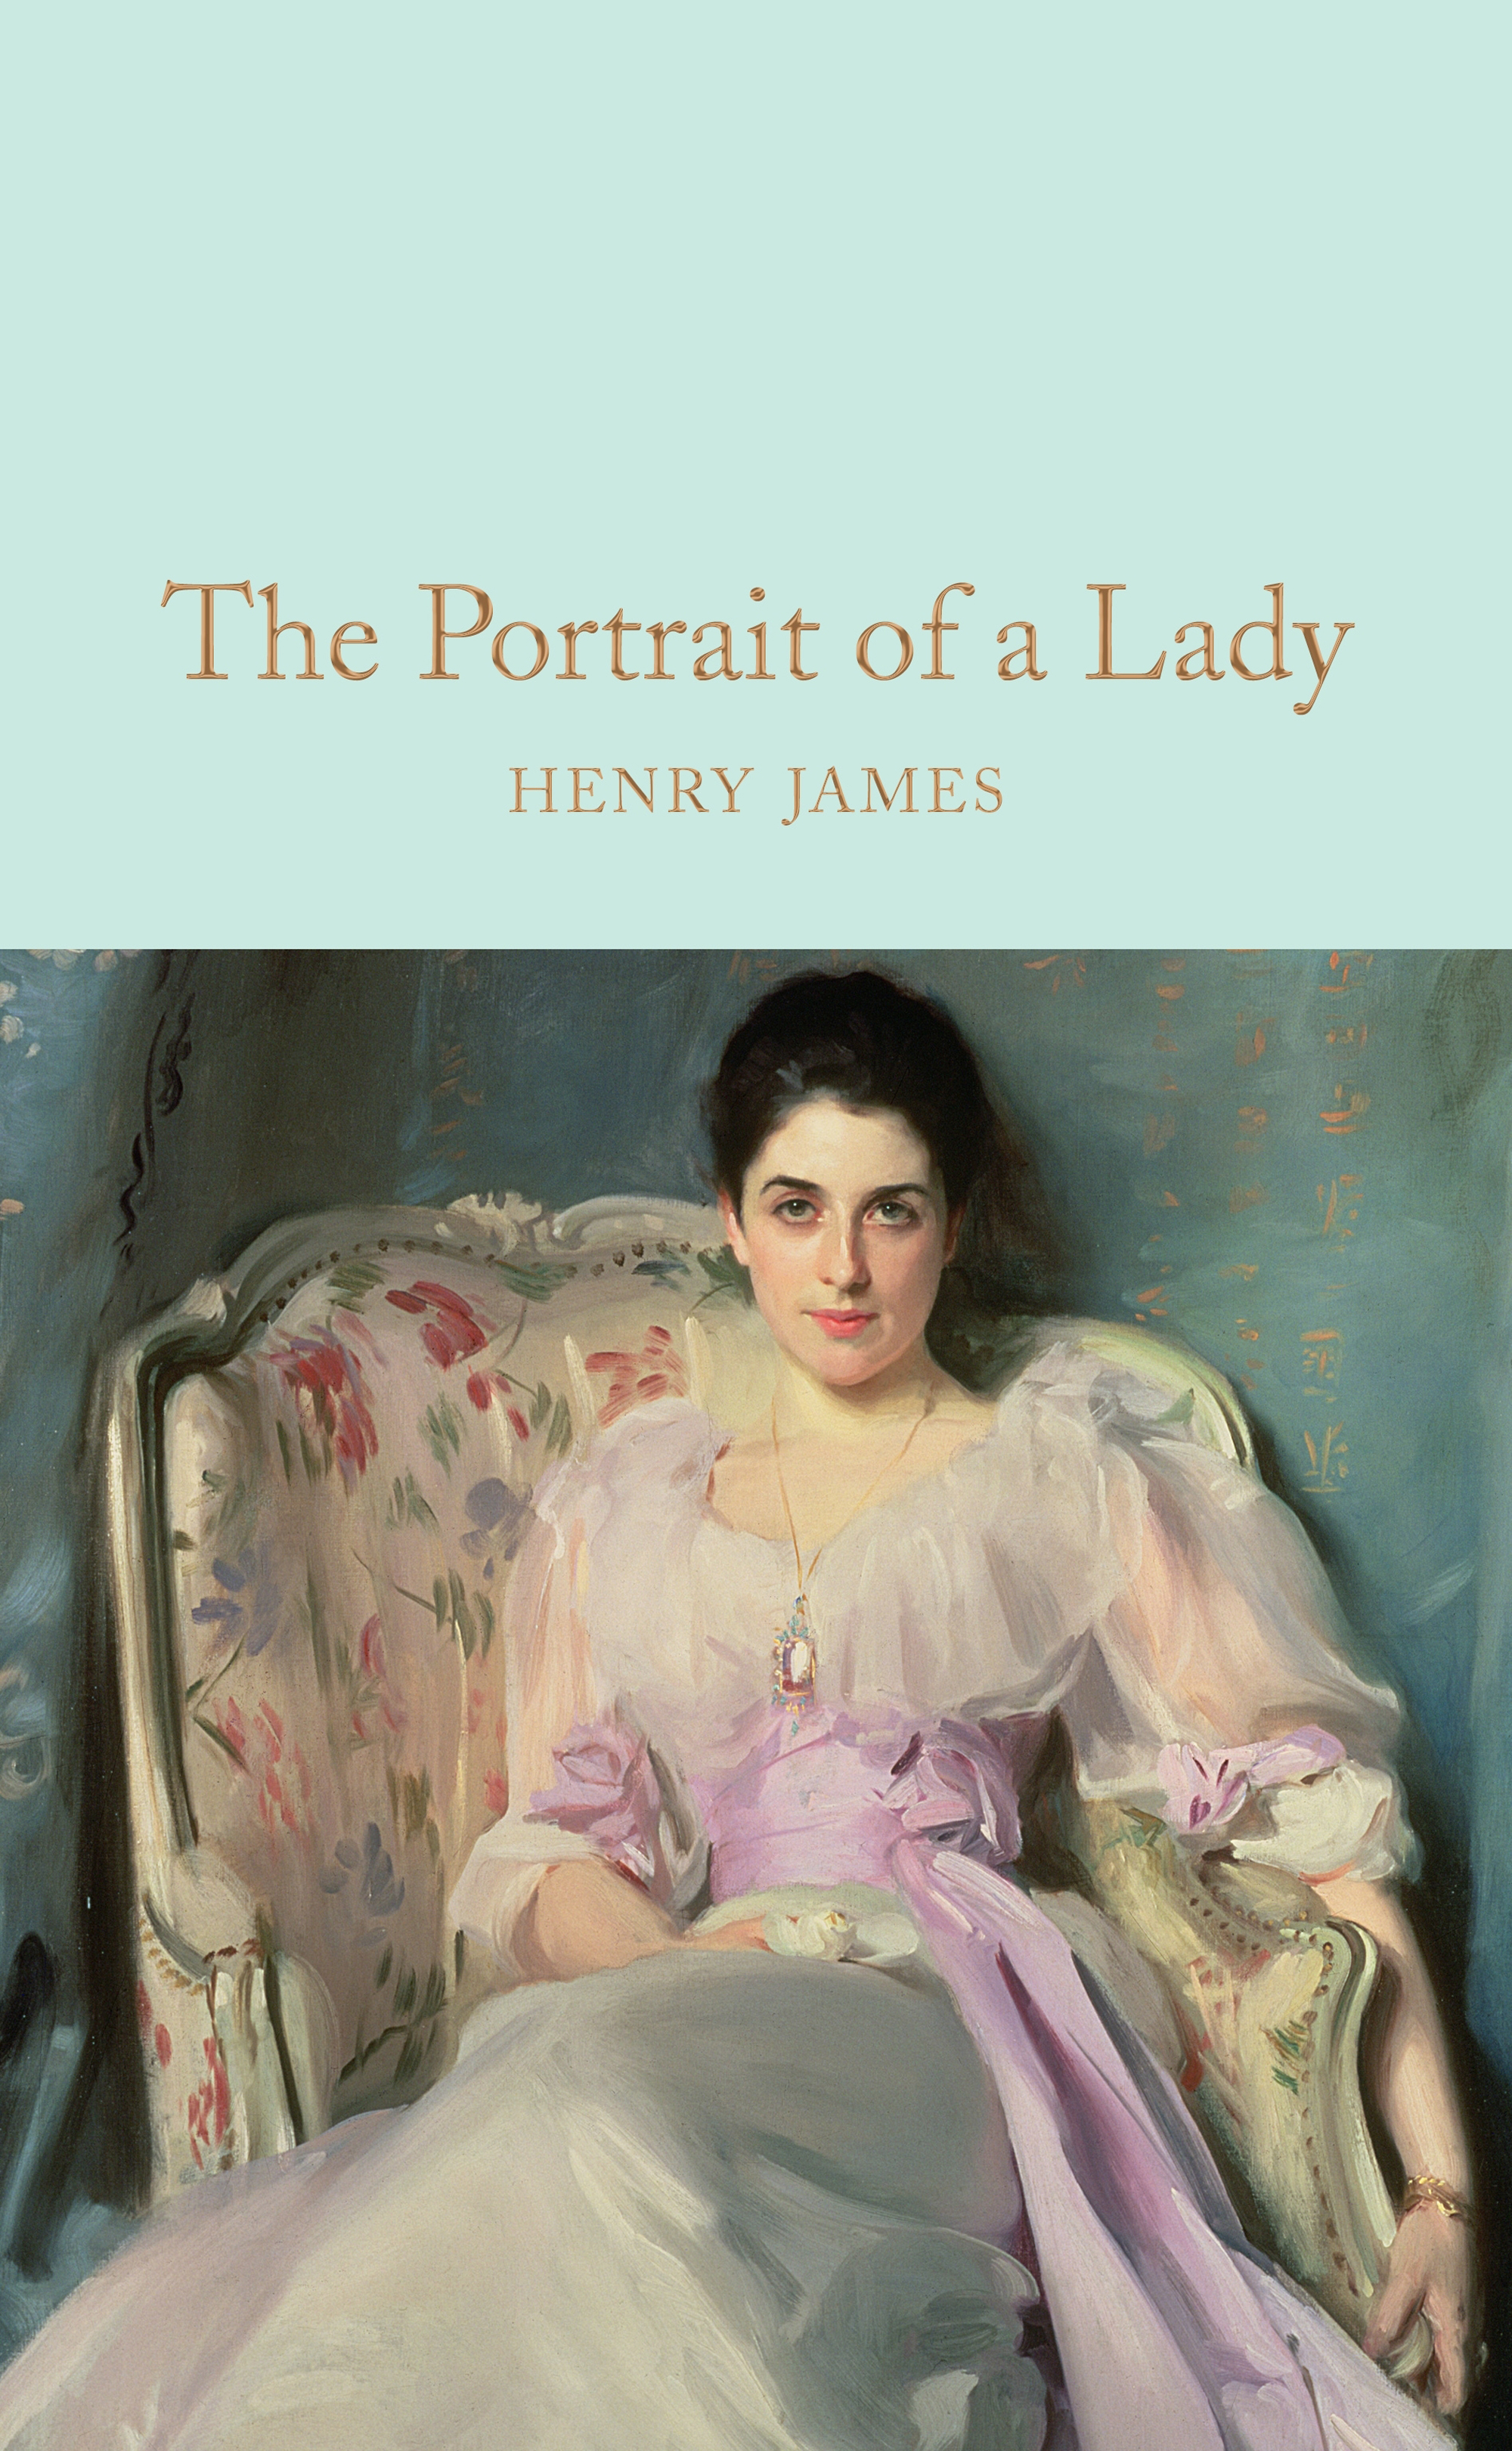 Cover of Portrait of a Lady by Henry James featuring a painting of a young woman in an armchair.